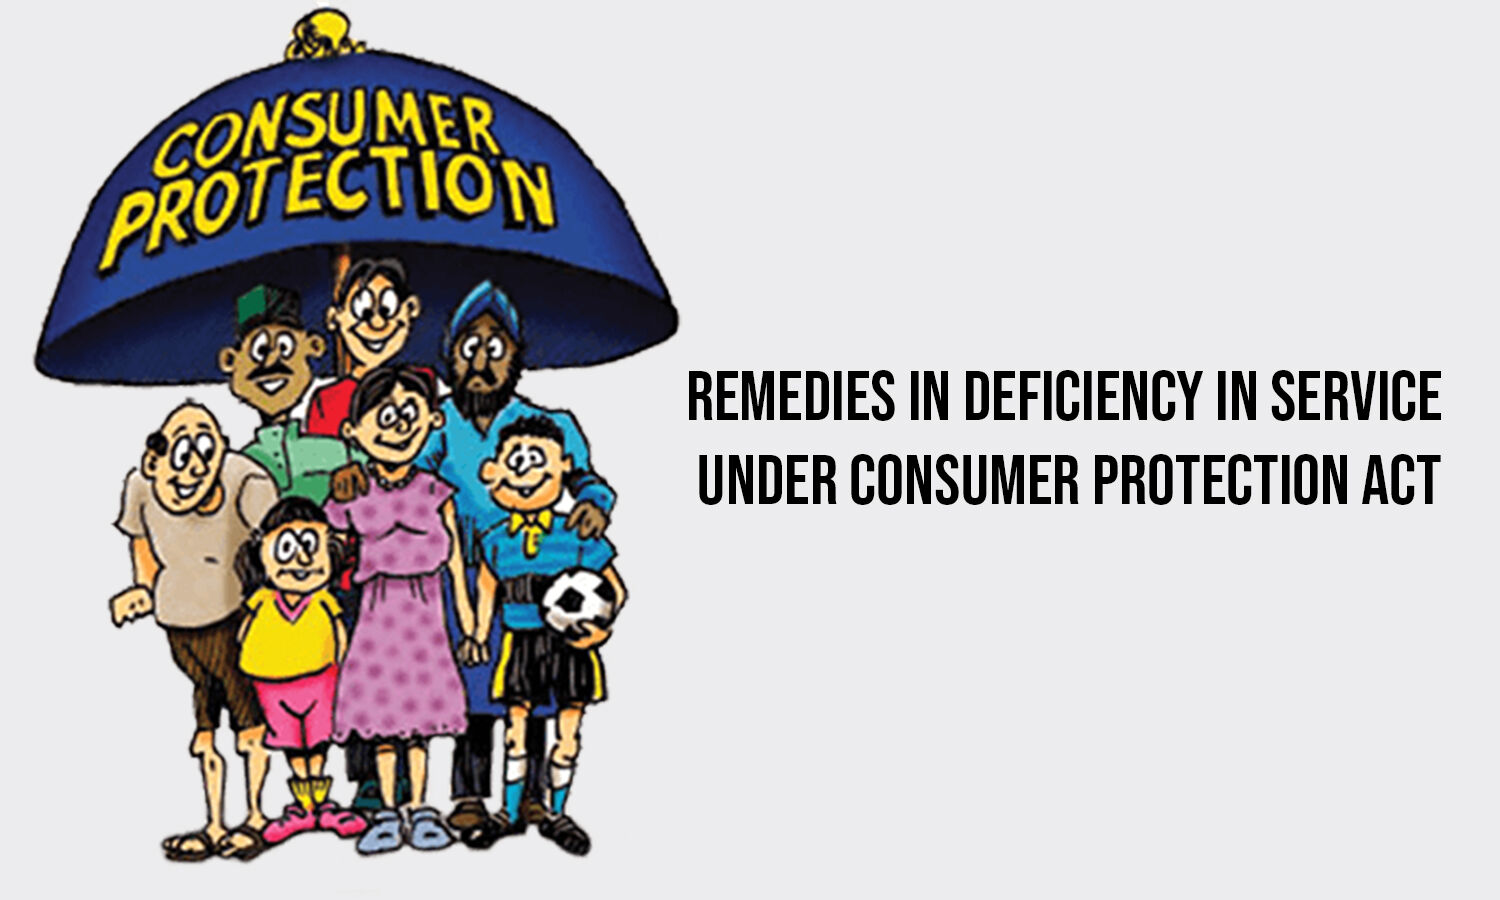 What are the remedies for service deficiency under Consumer Protection